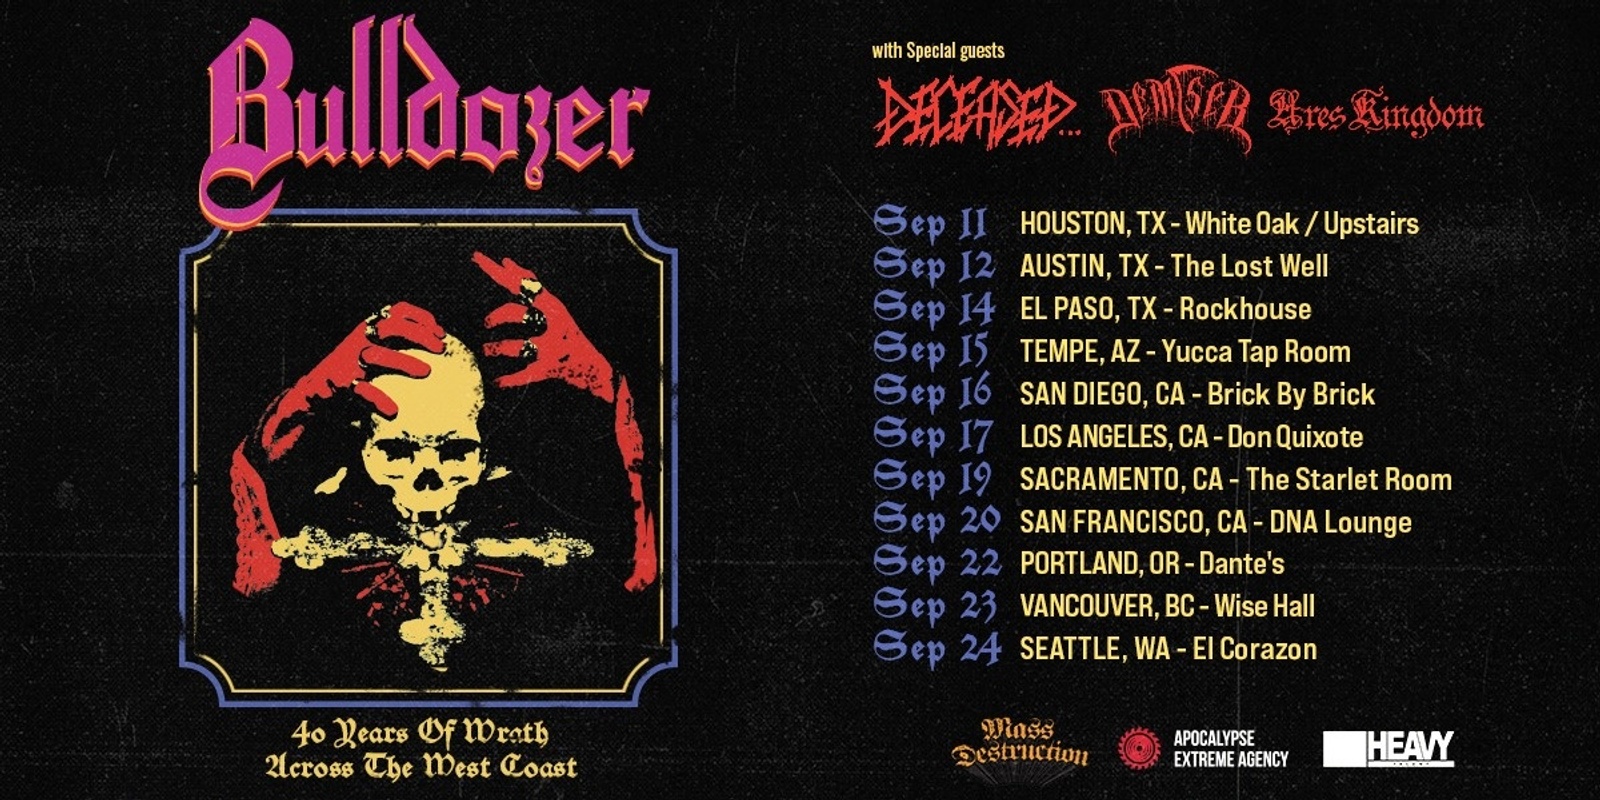 Banner image for Bulldozer- 40 years of Wrath Tour w Deceased, Demiser, Ares Kingdom